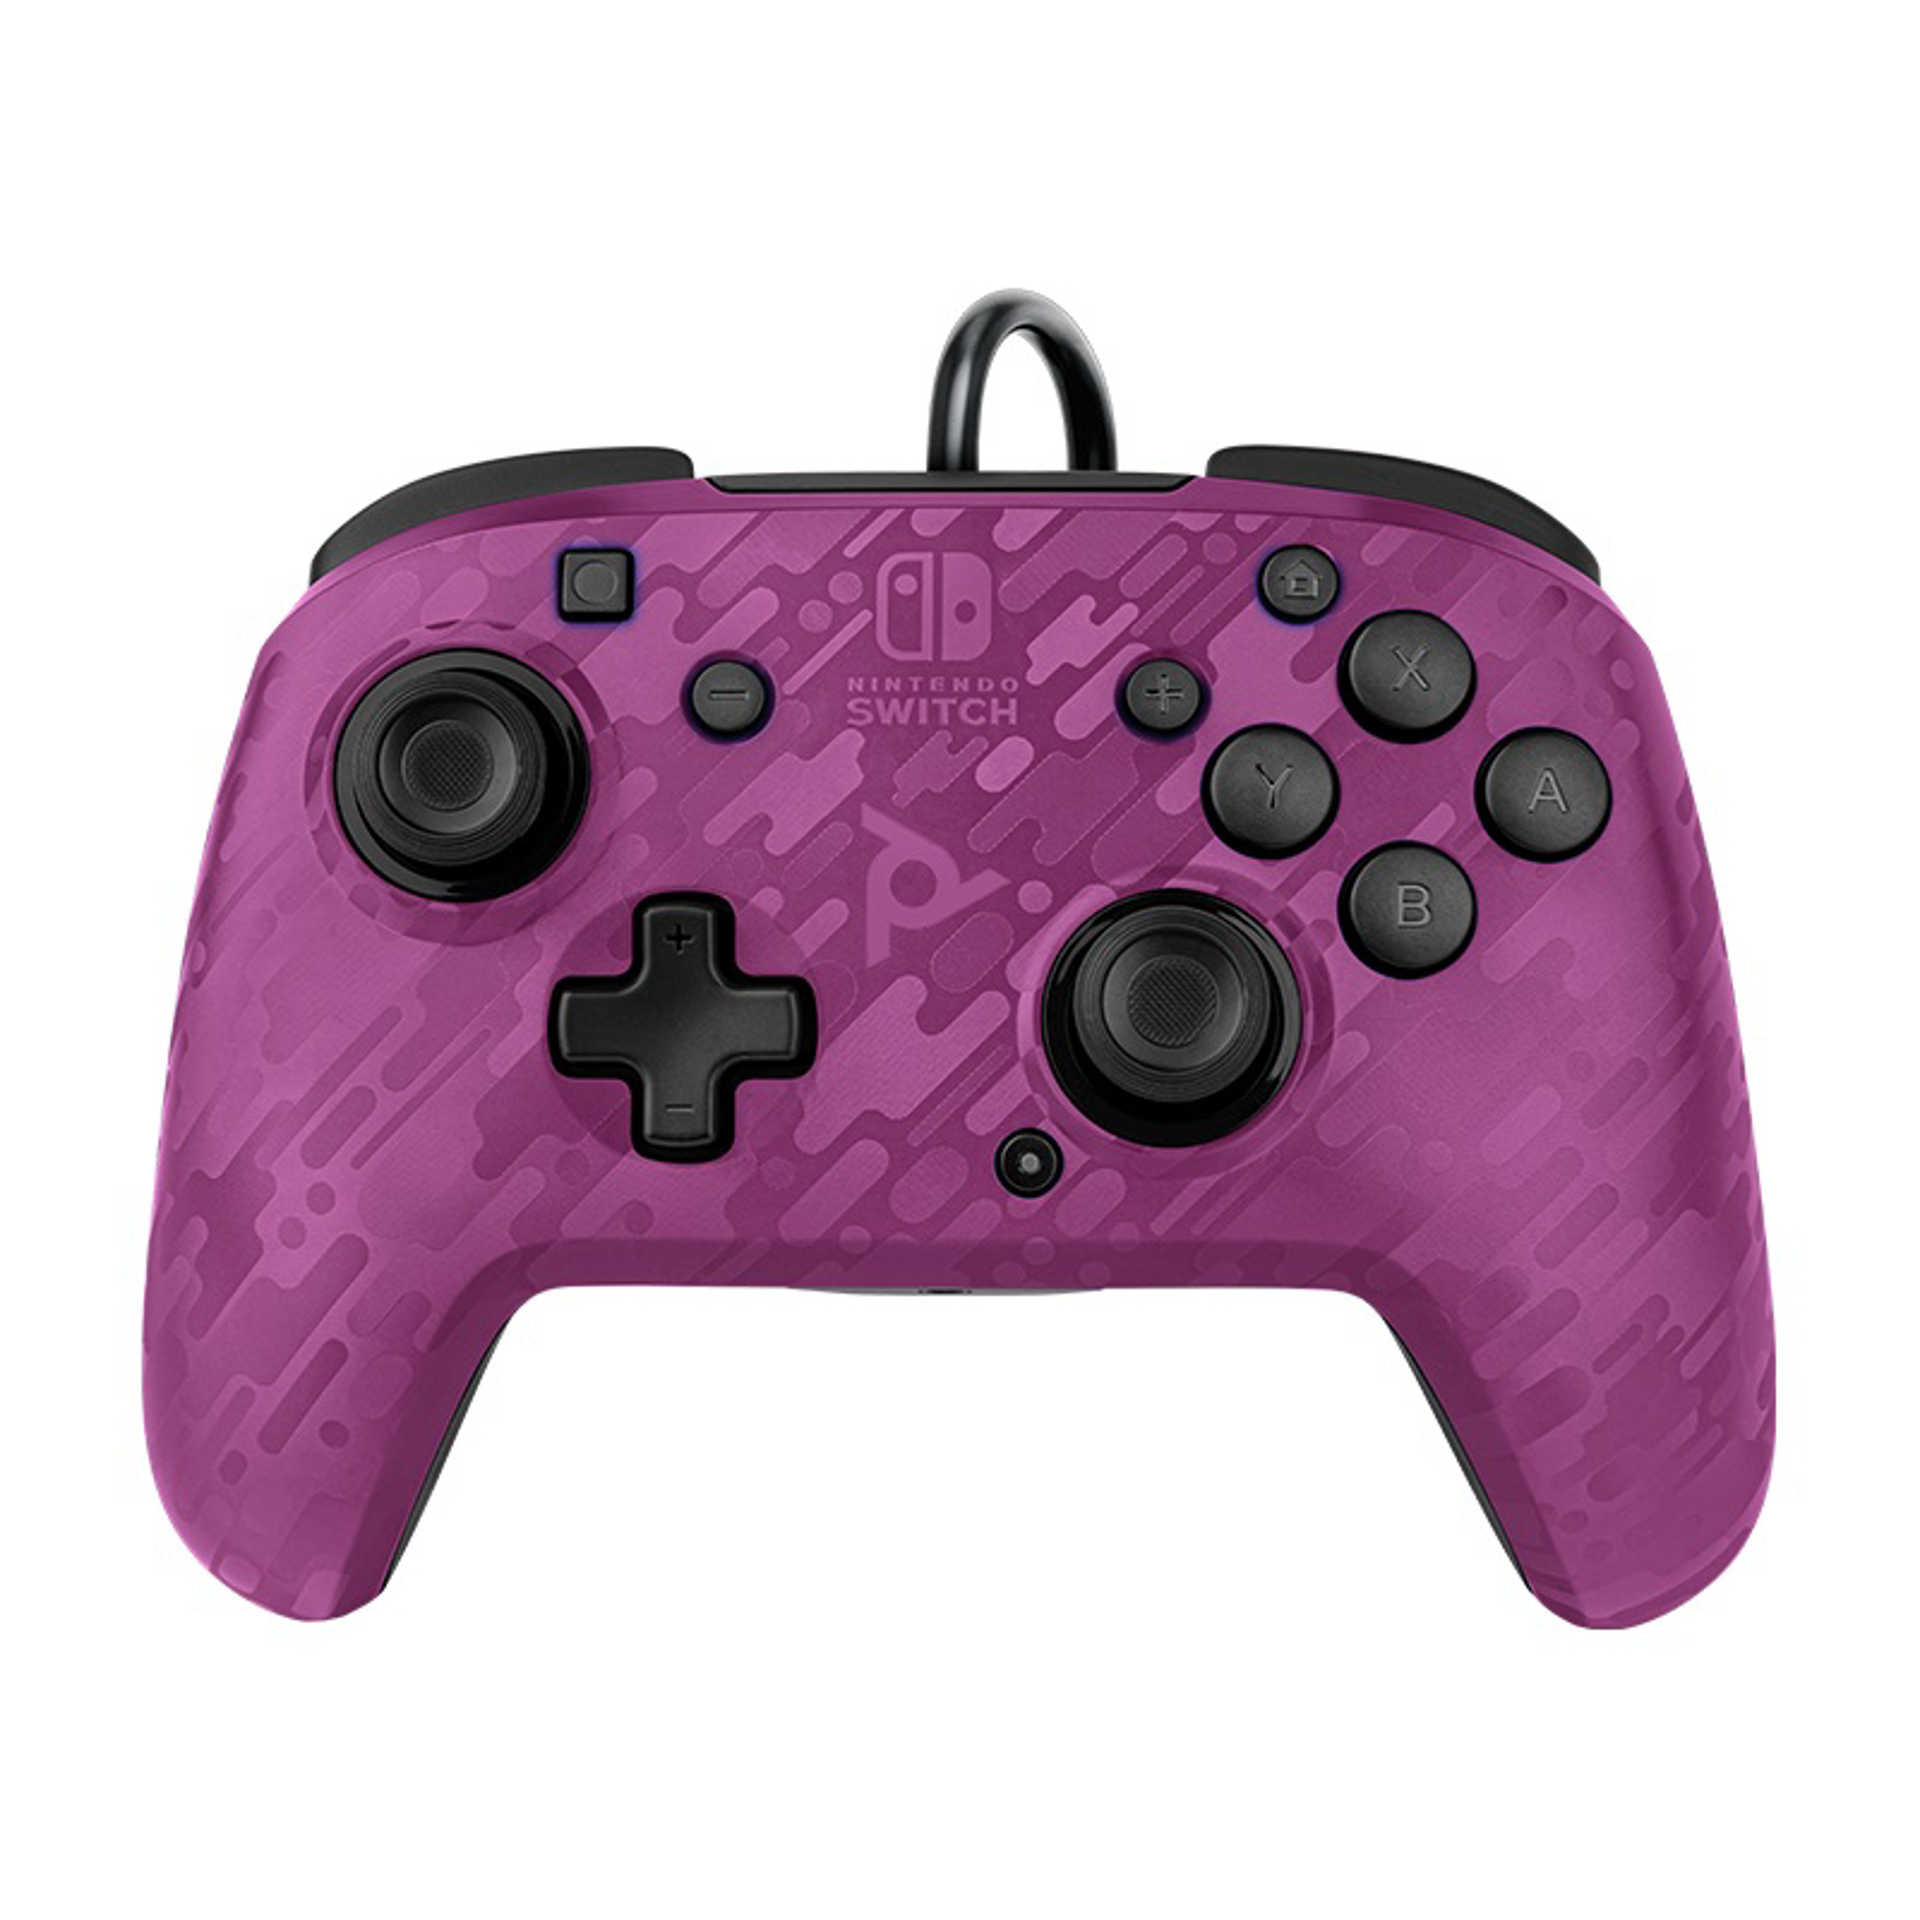 PDP - Manette filaire Faceoff Deluxe+ Audio Violet camouflage po